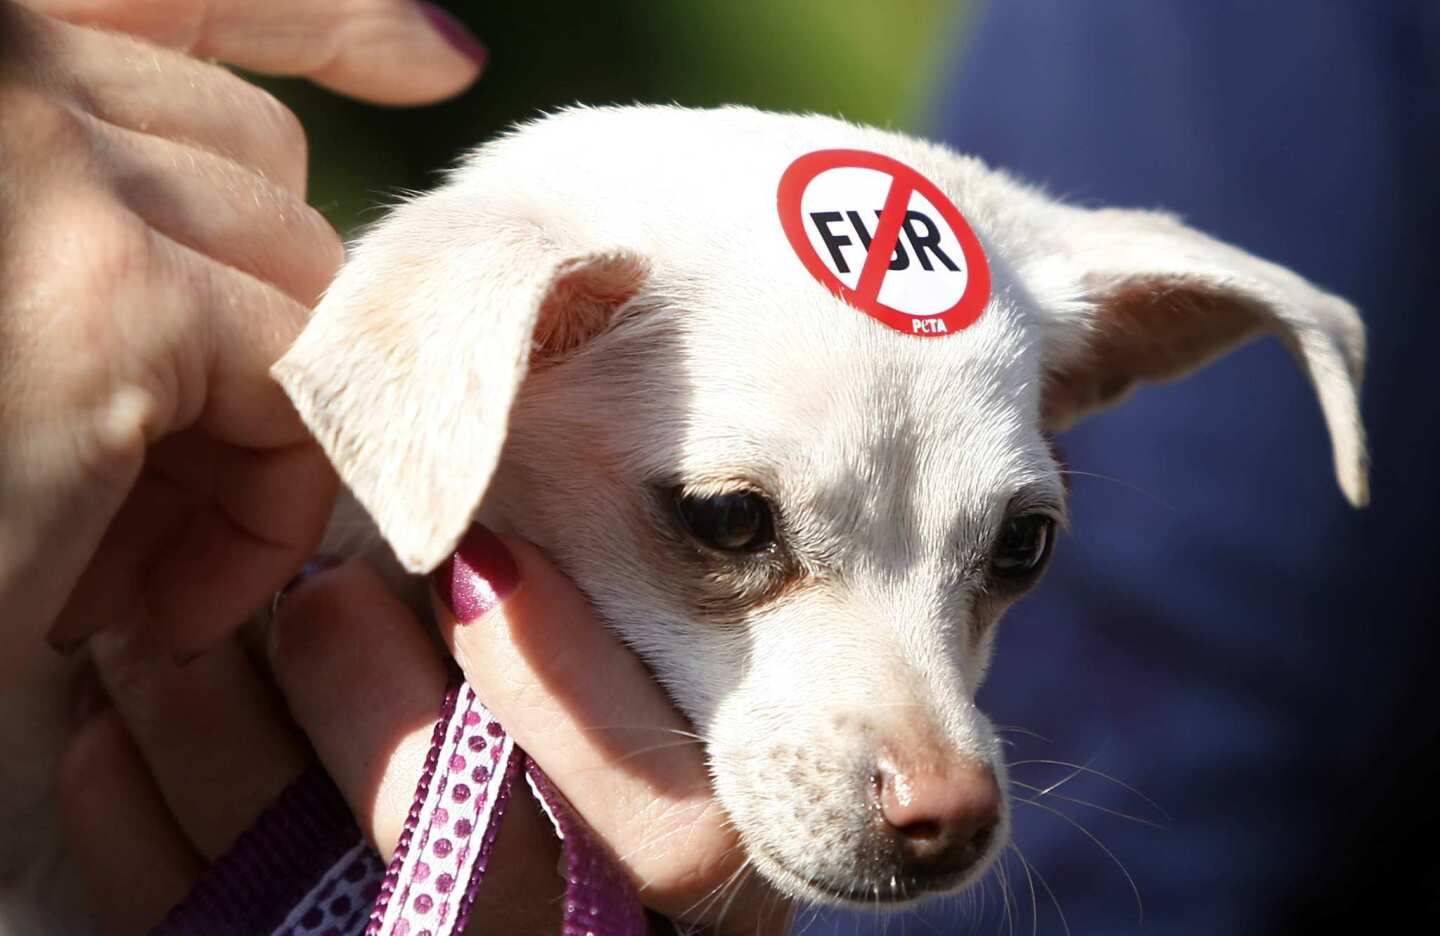 West Hollywood adopted the nation's first ban on the sale of fur clothing, which is slated to take effect in 2013.